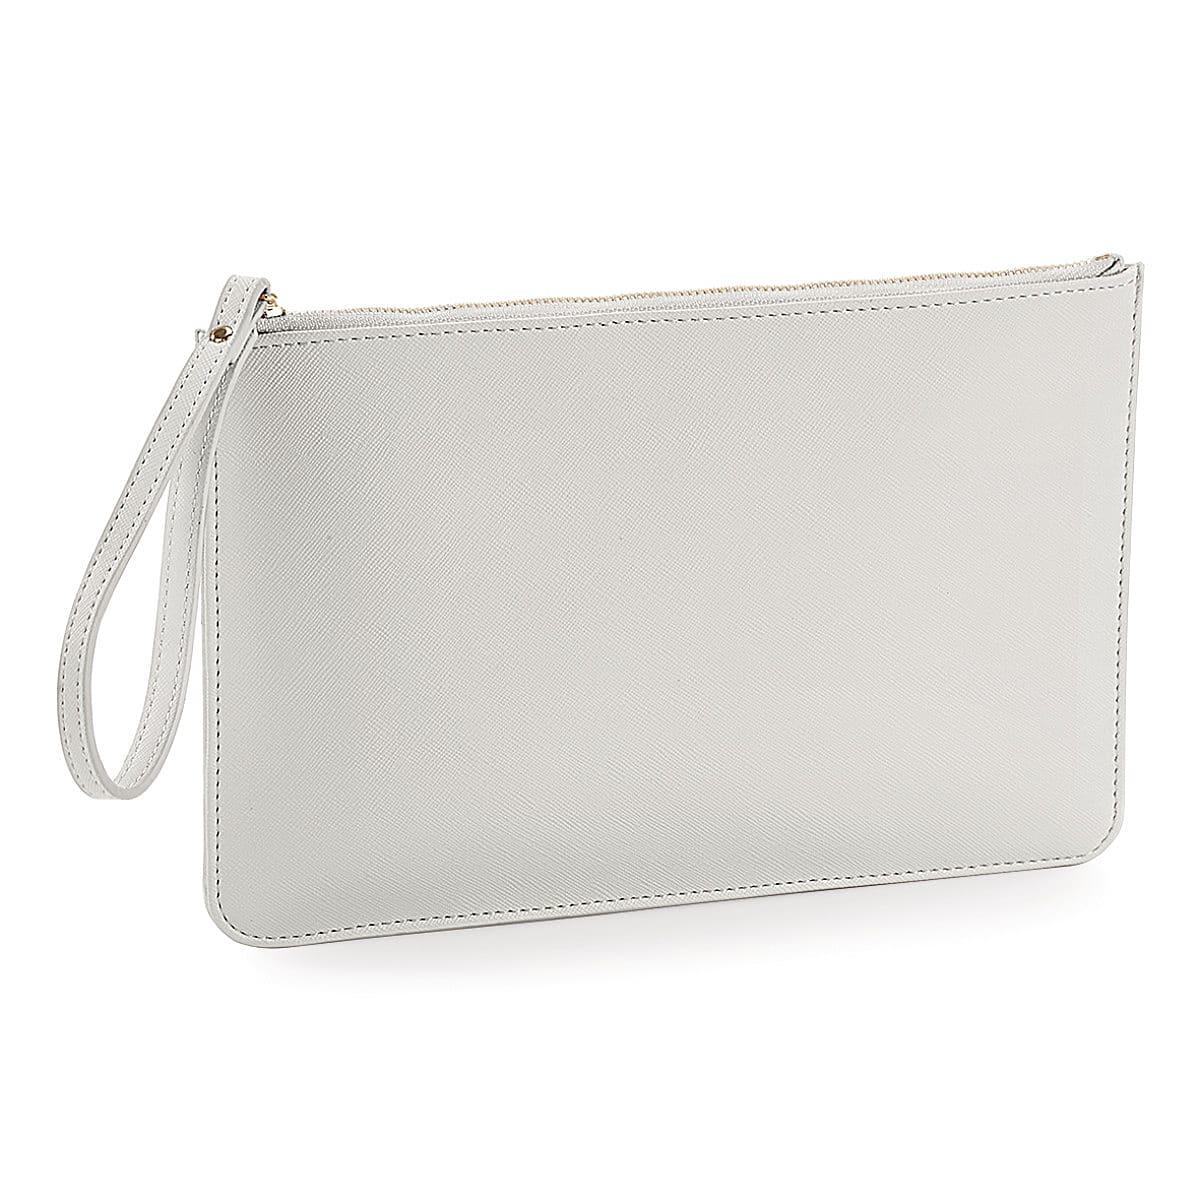 Bagbase Boutique Accessory Pouch in Soft Grey (Product Code: BG750)